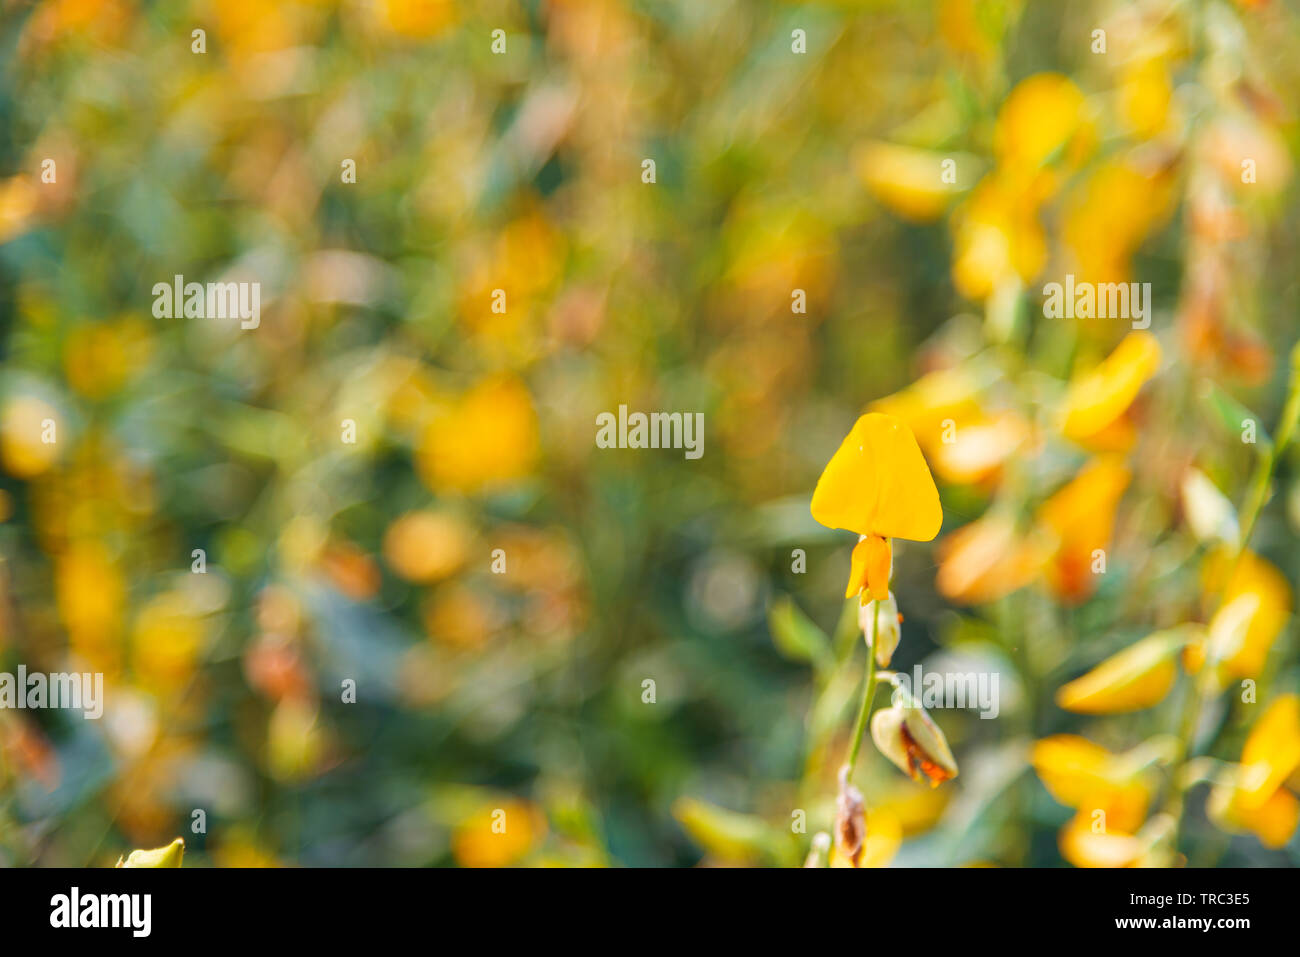 Yellow Sunn hemp flower in sunny day with blurred background Stock Photo